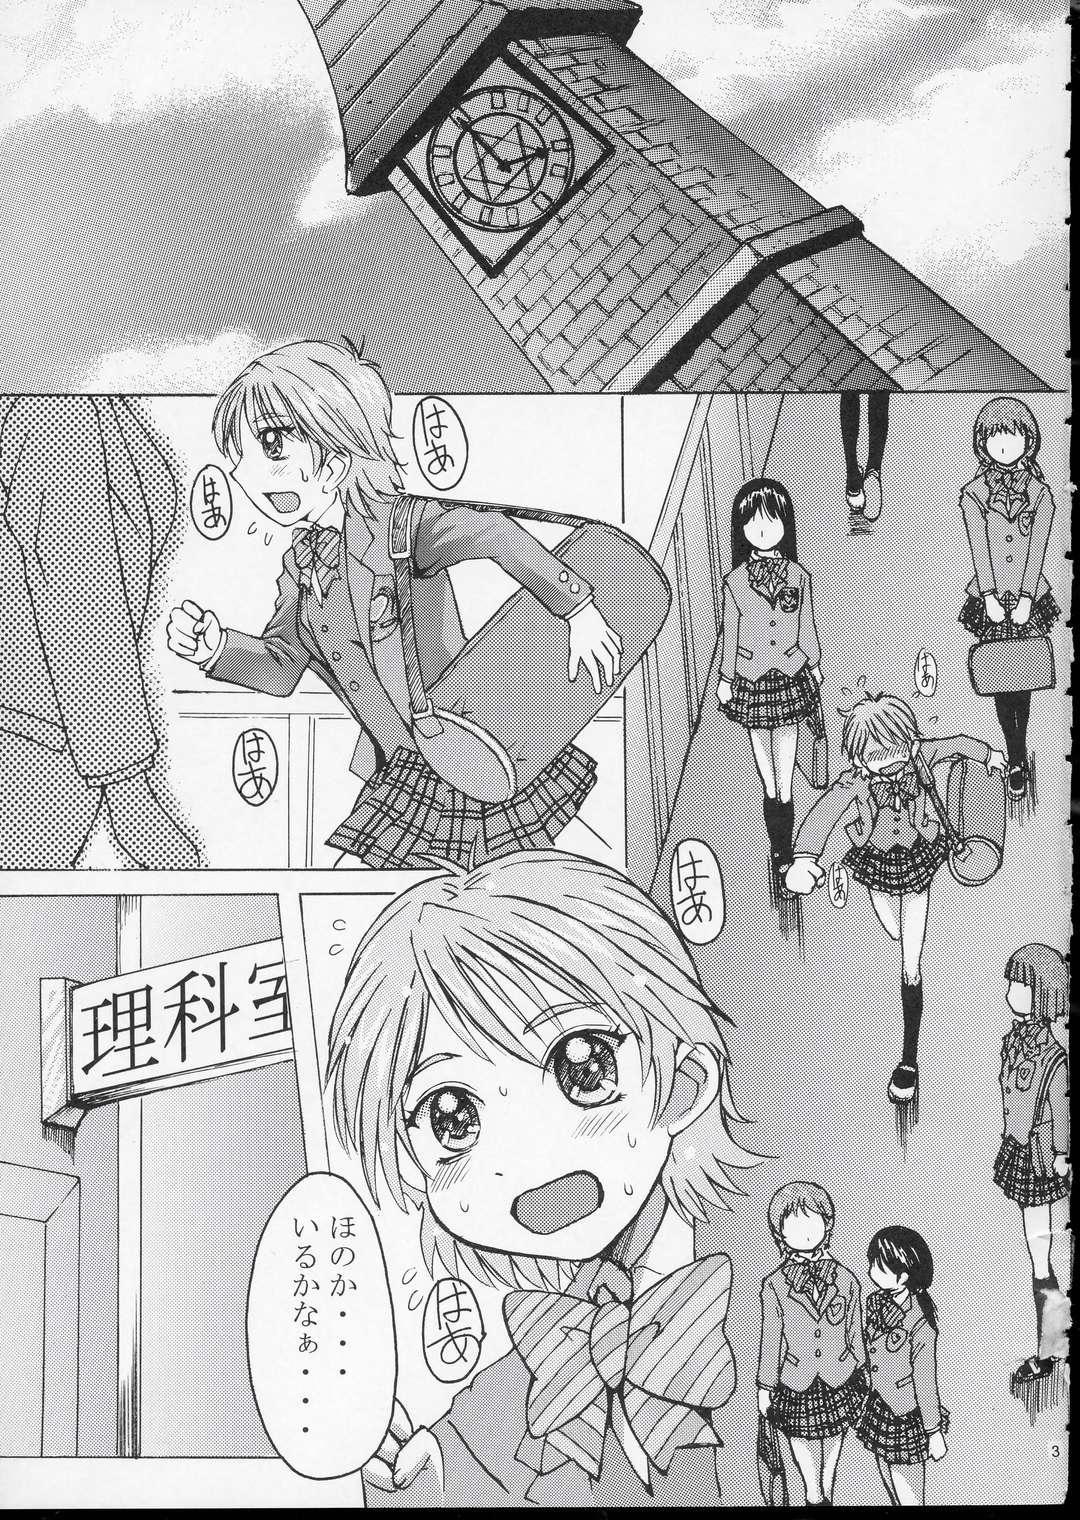 Gay Kissing Kuroi Taiyou Kage no Tsuki EPISODE 1: In order that all may love you - Black Sun and Shadow Moon - Pretty cure Gay Cut - Page 4